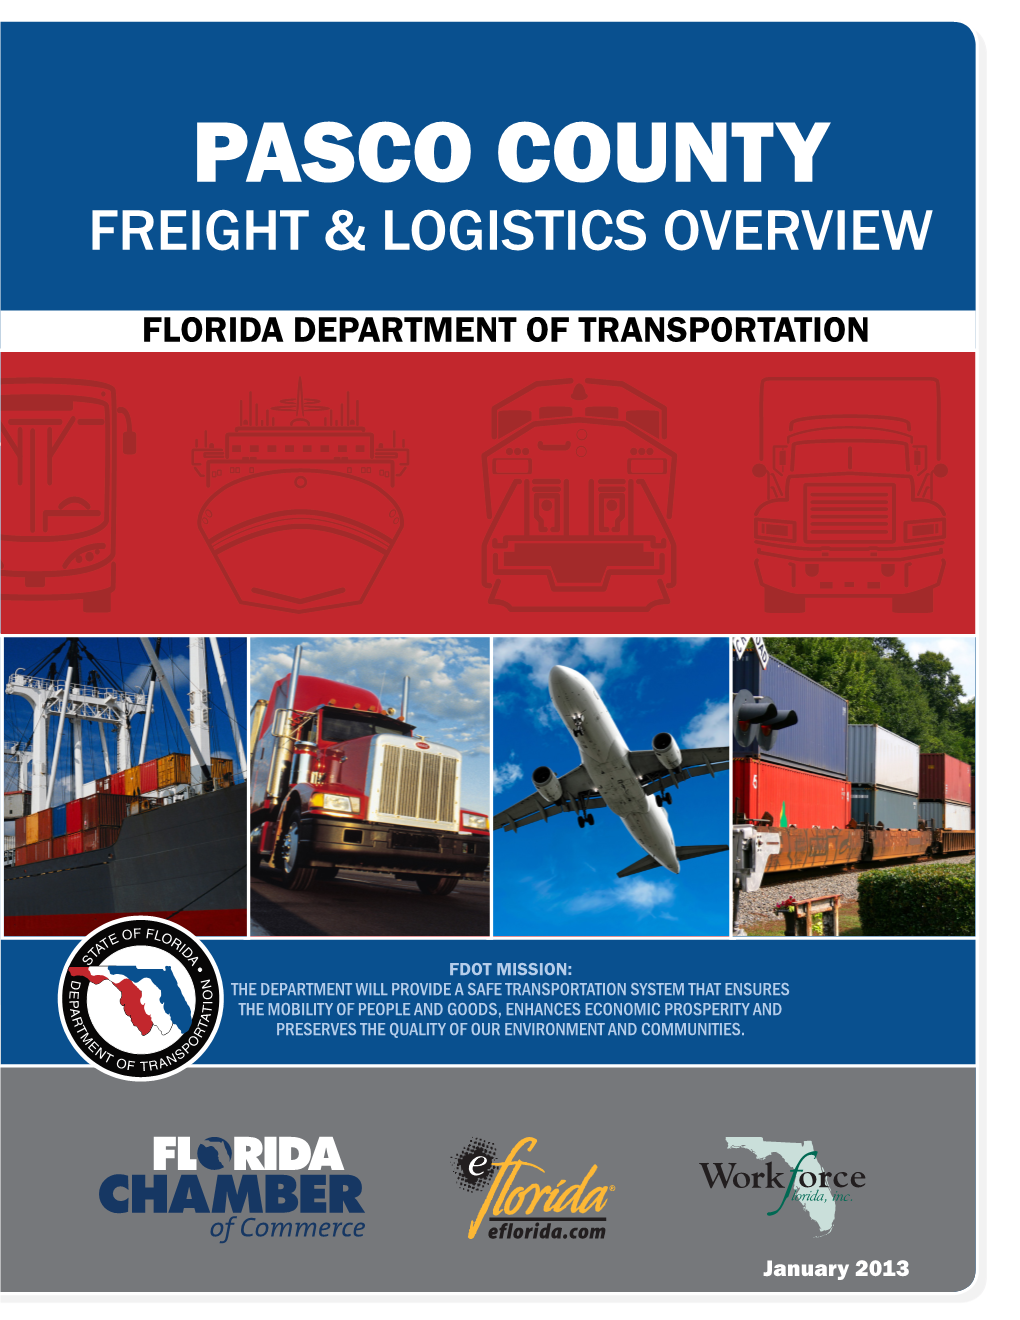 Pasco County Freight & Logistics Overview